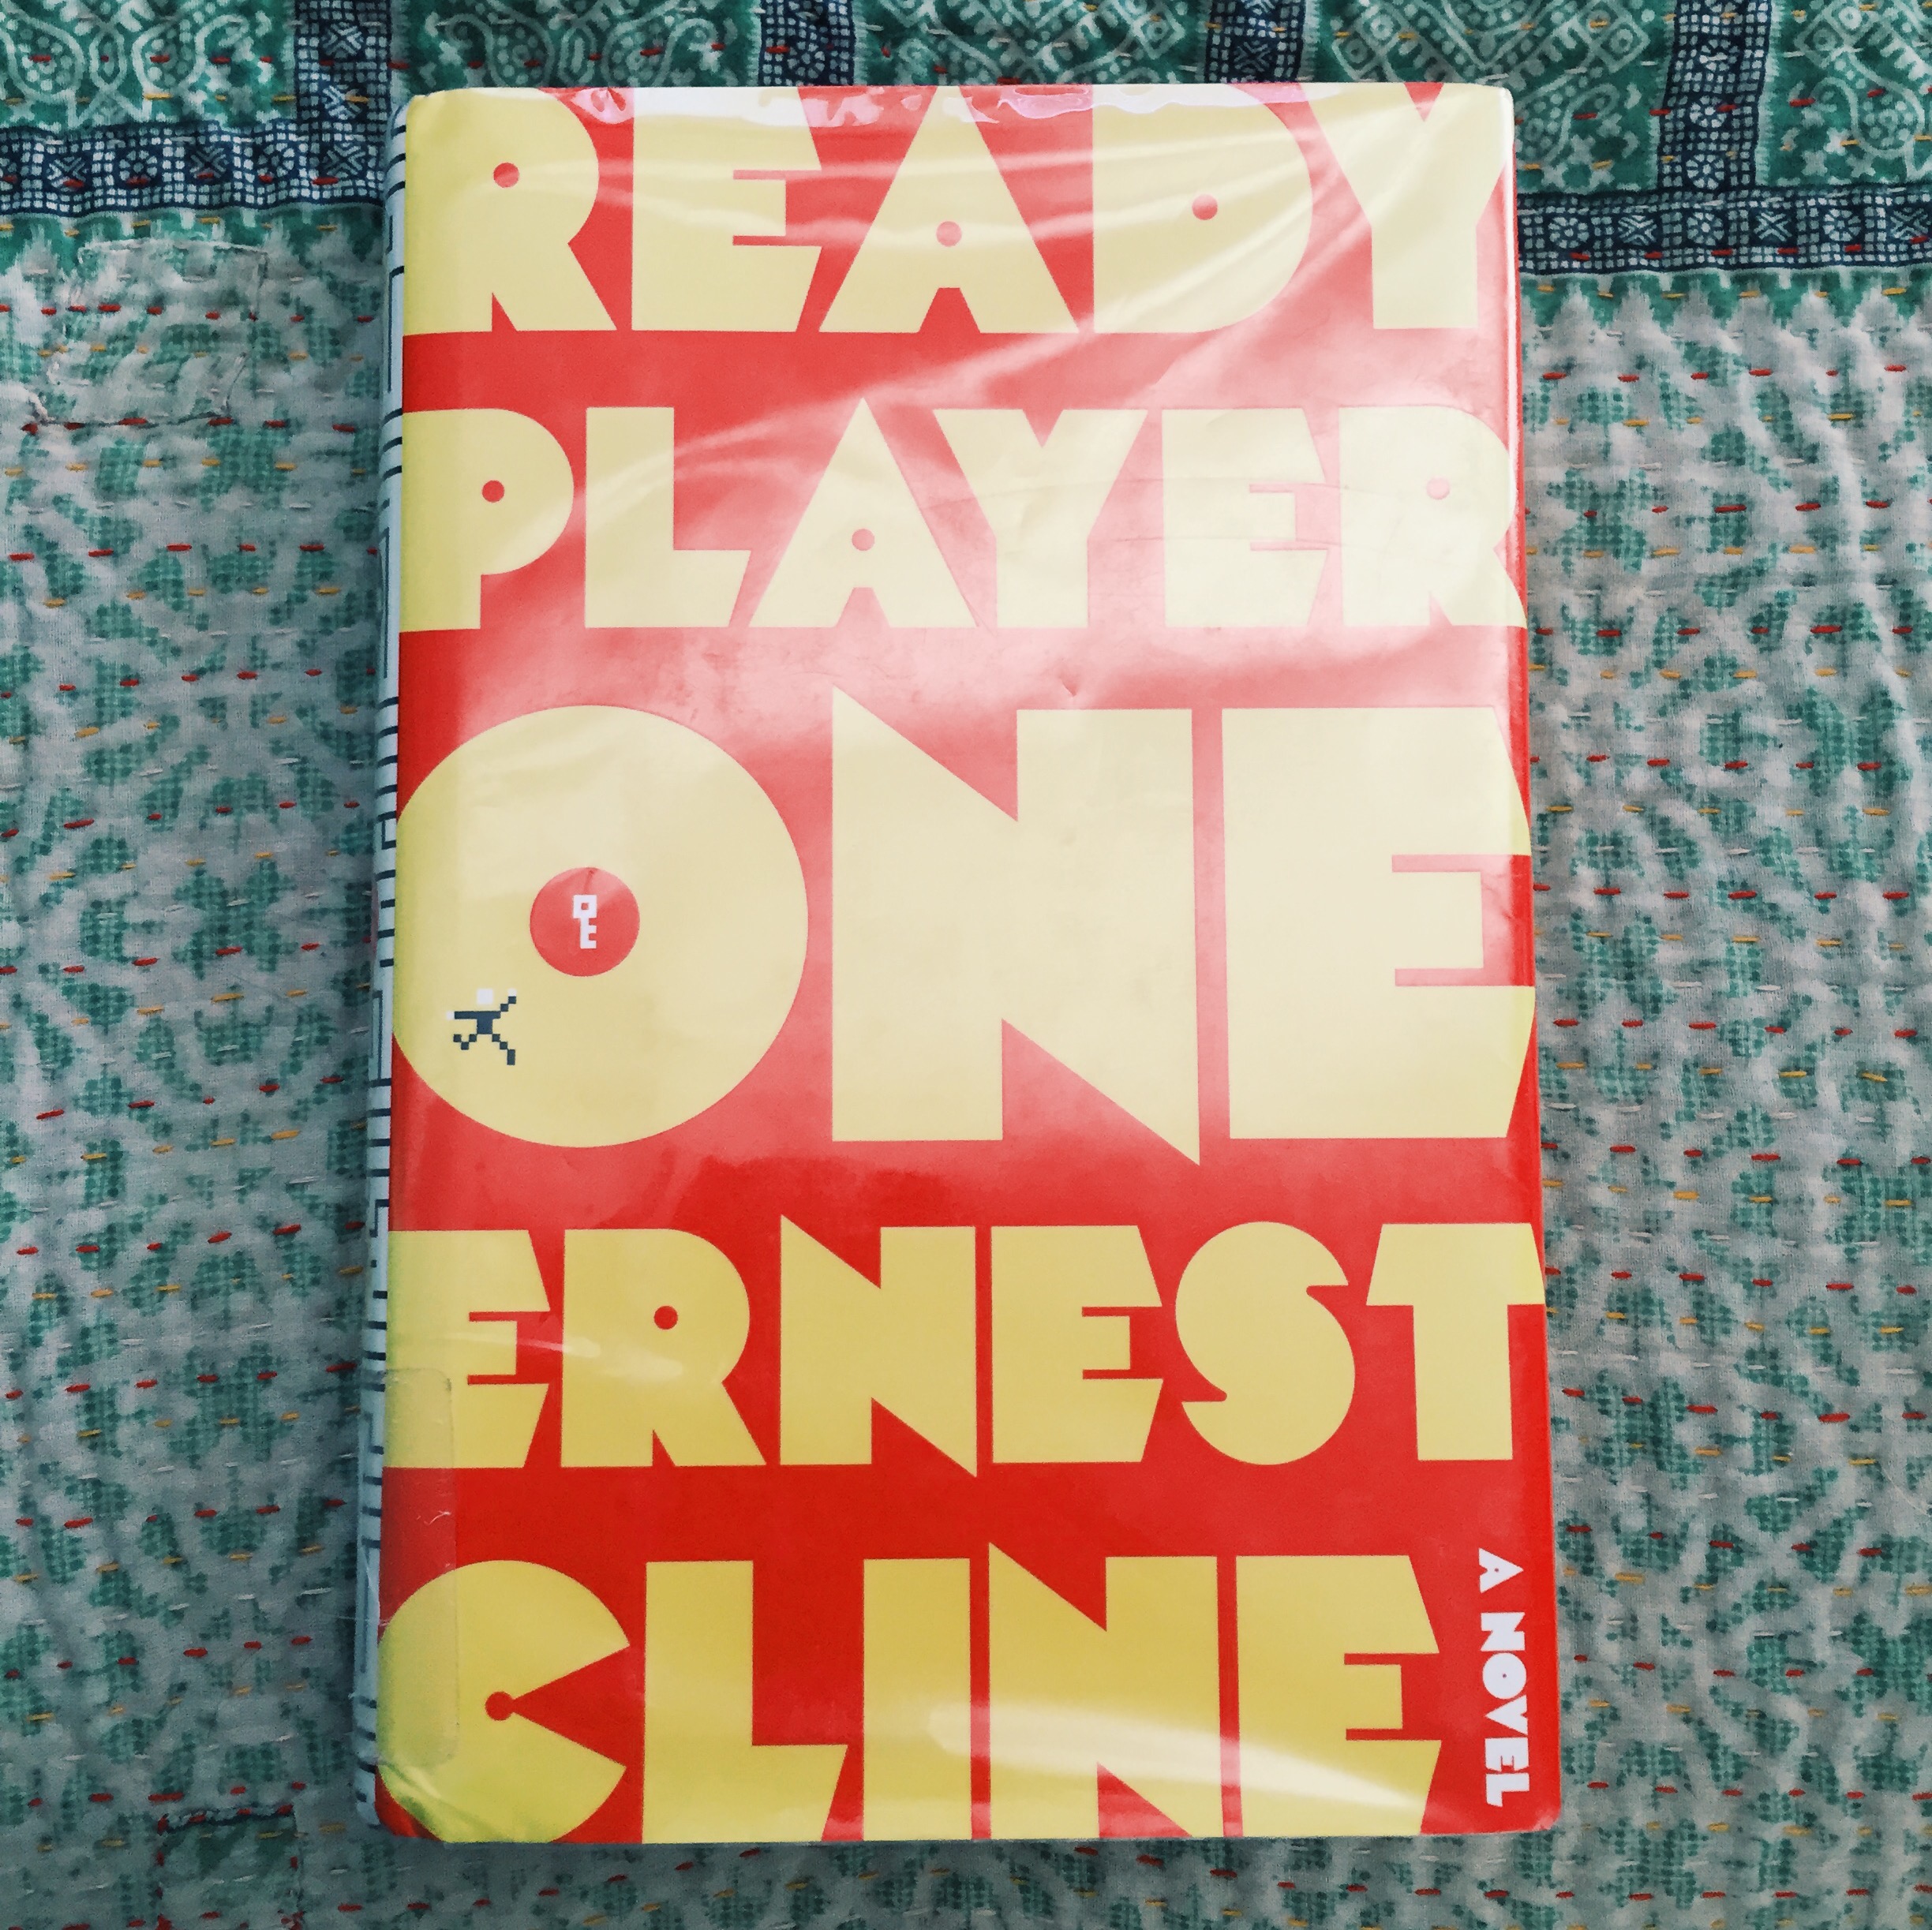 ready player one by ernest cline